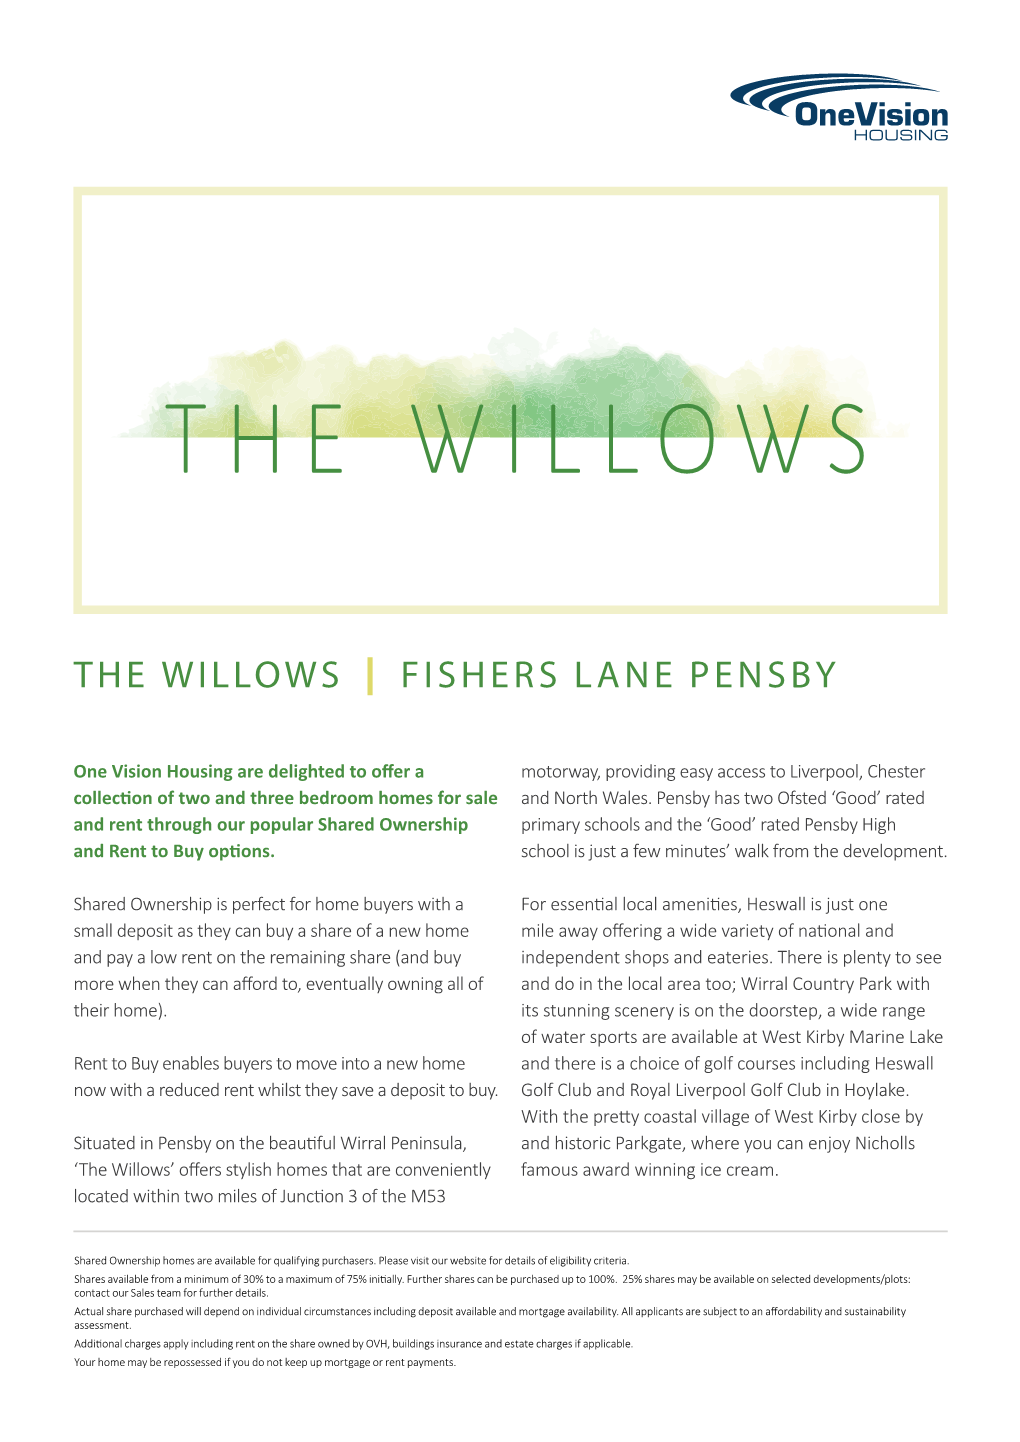 The Willows Fishers Lane Pensby